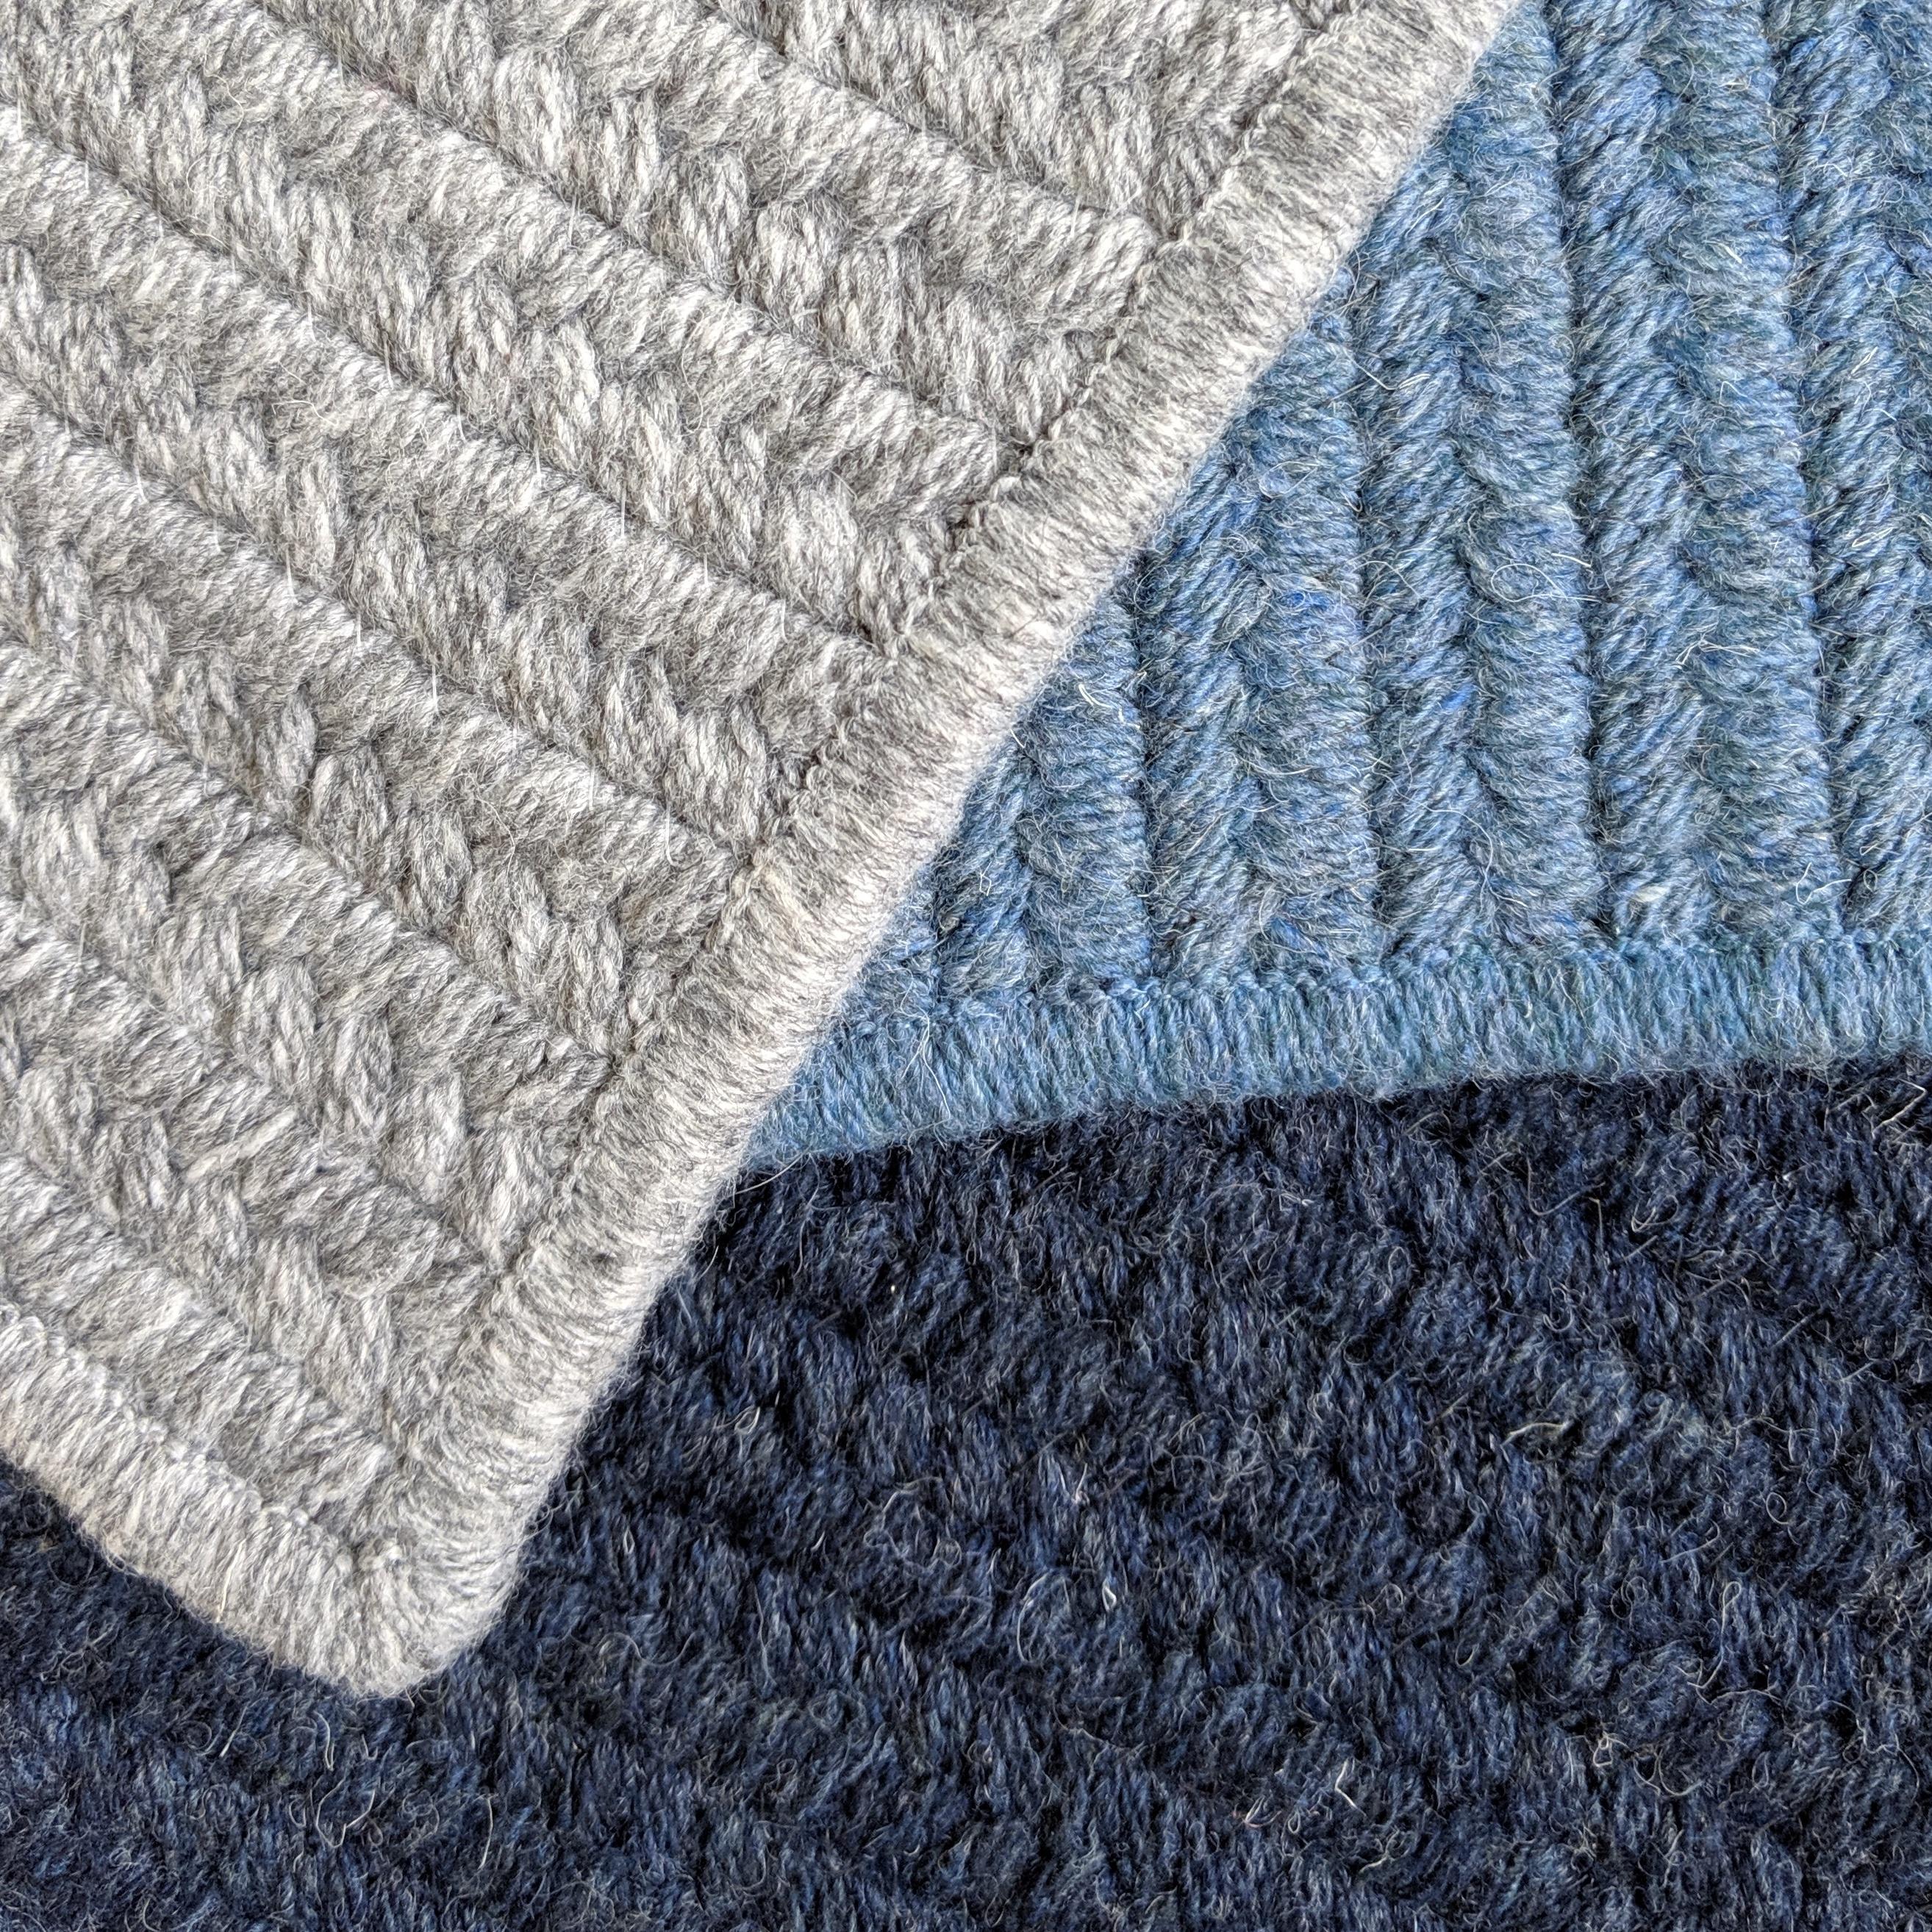 This listing is for a 9x12 rug in the colors shown in the first image plus a rug pad for use on hard surfaces.

We offer a number of different colors. We can mix colors akin to the rug photographed or the rug can be produced out of a single color.